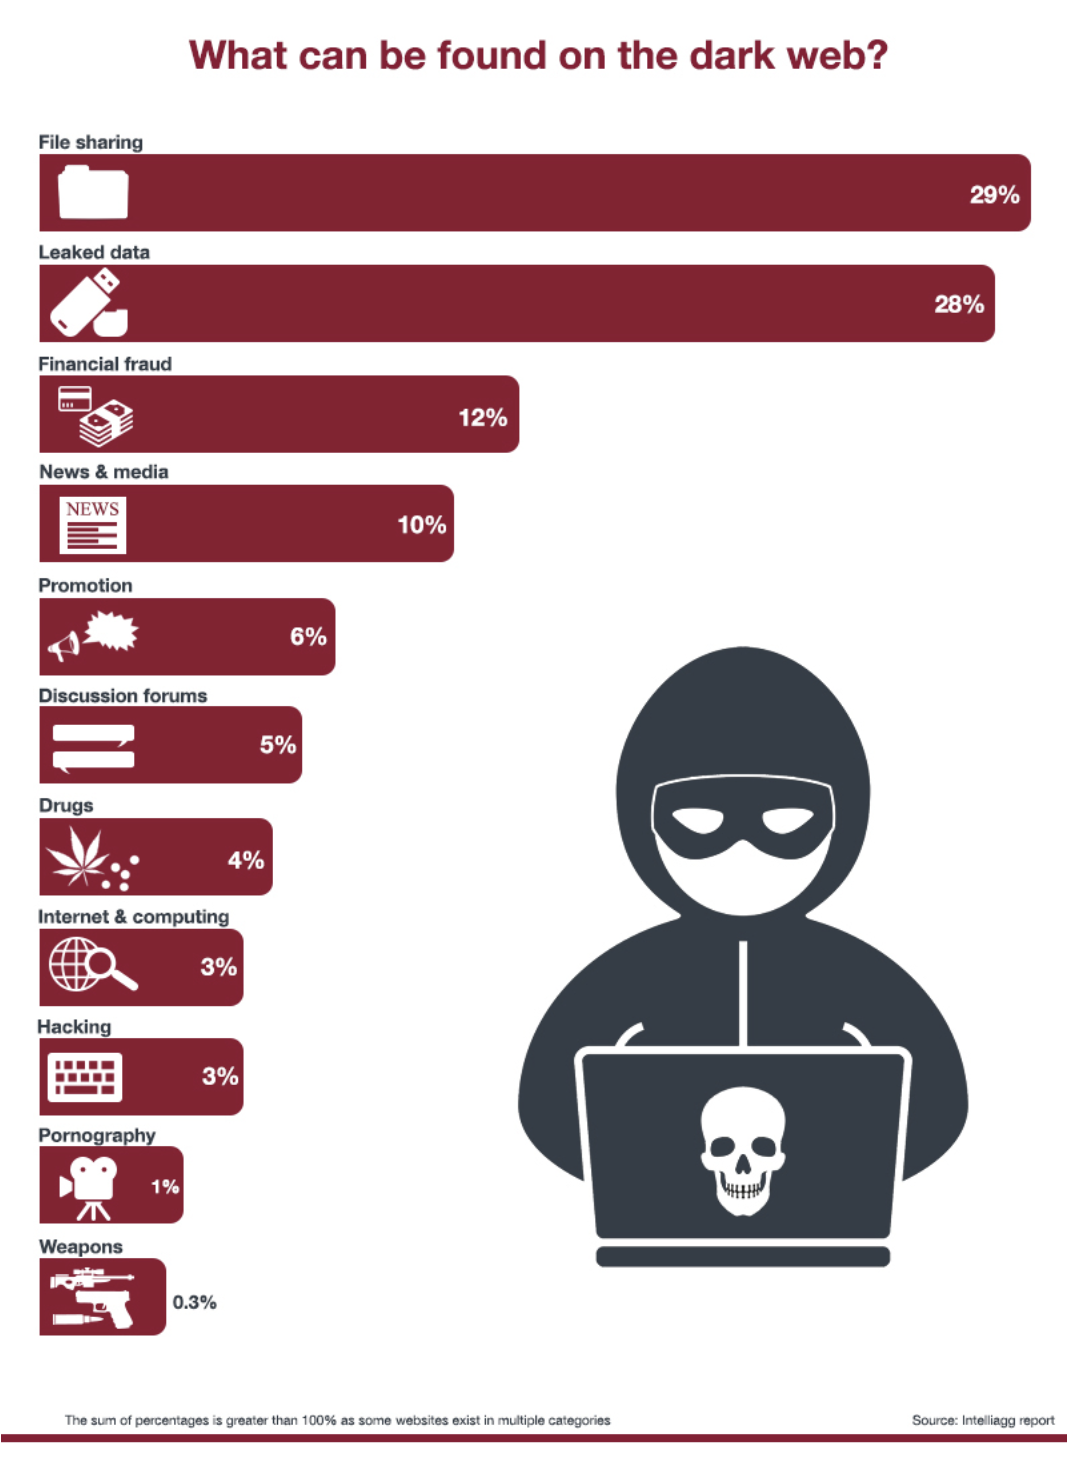 What data can be found in the dark web